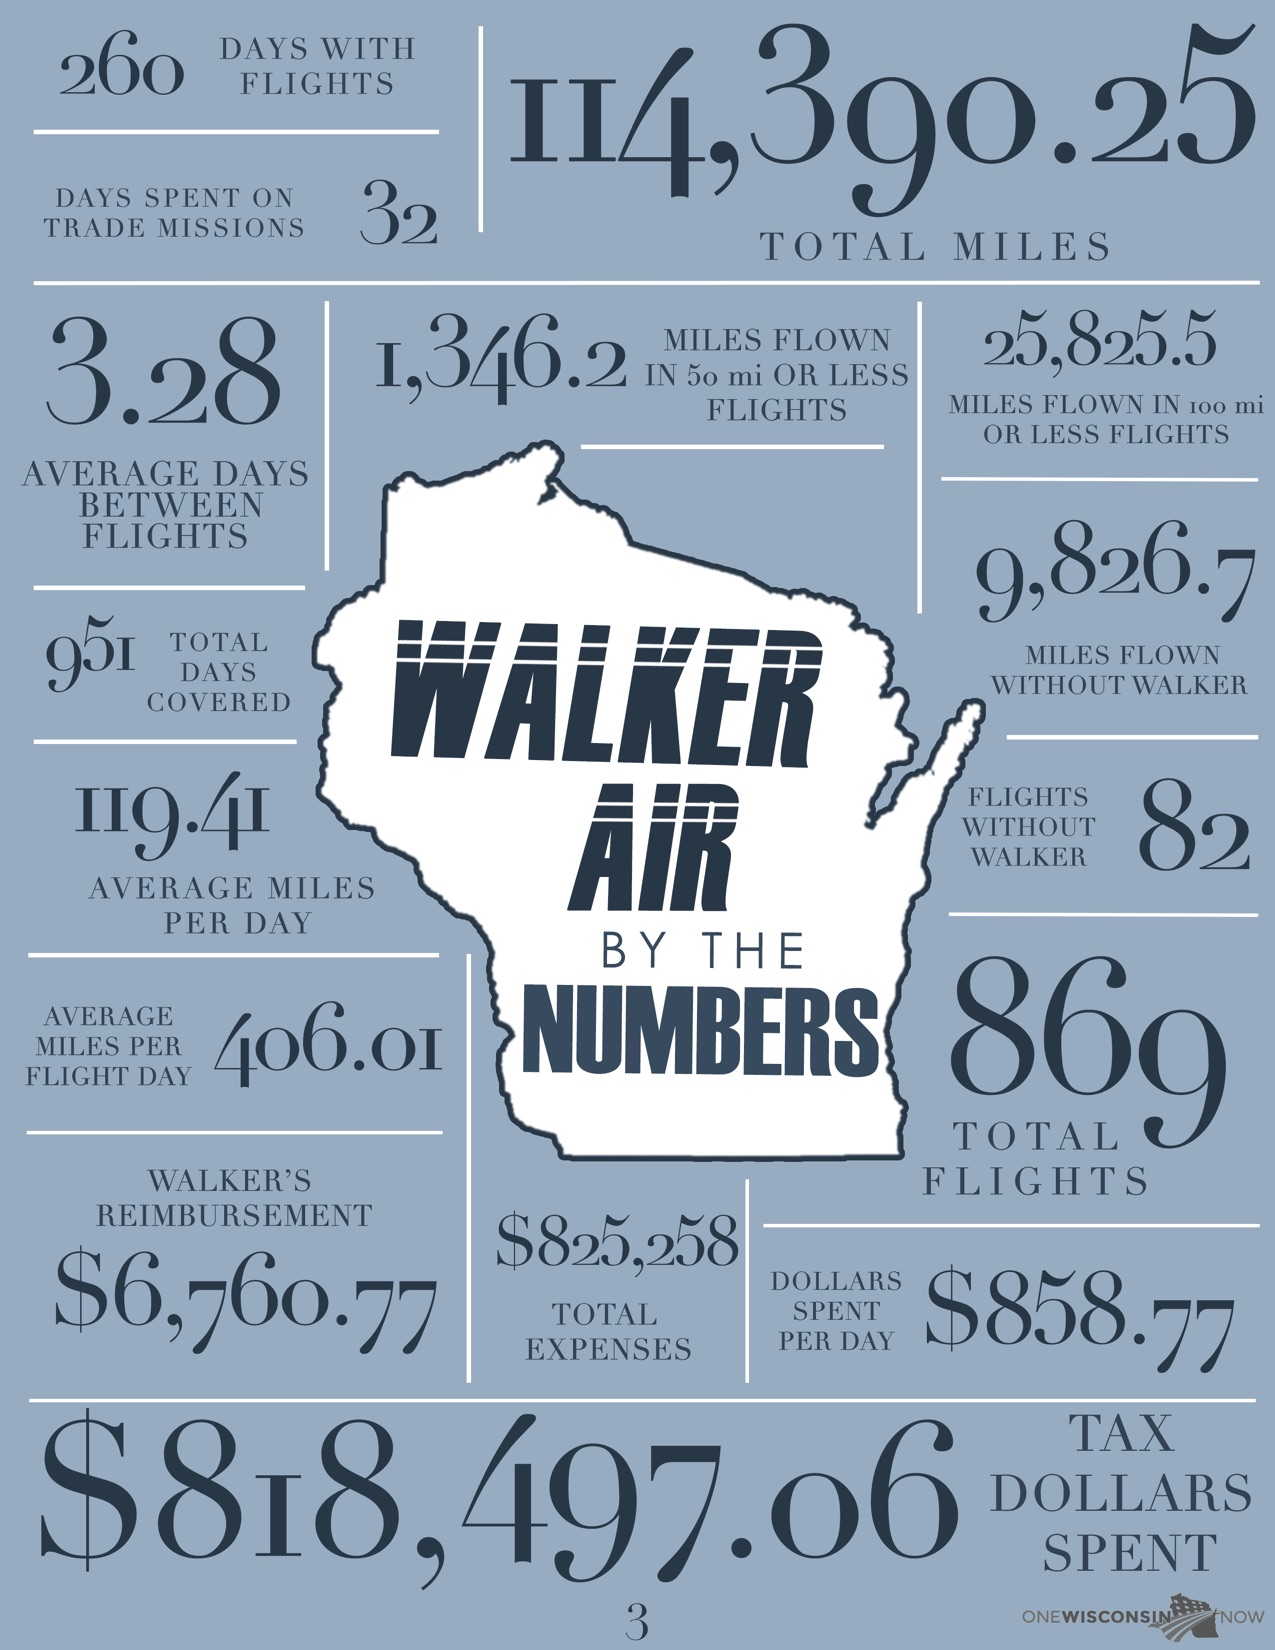 Scot Ross: Scott Walker, the frequent flying governor